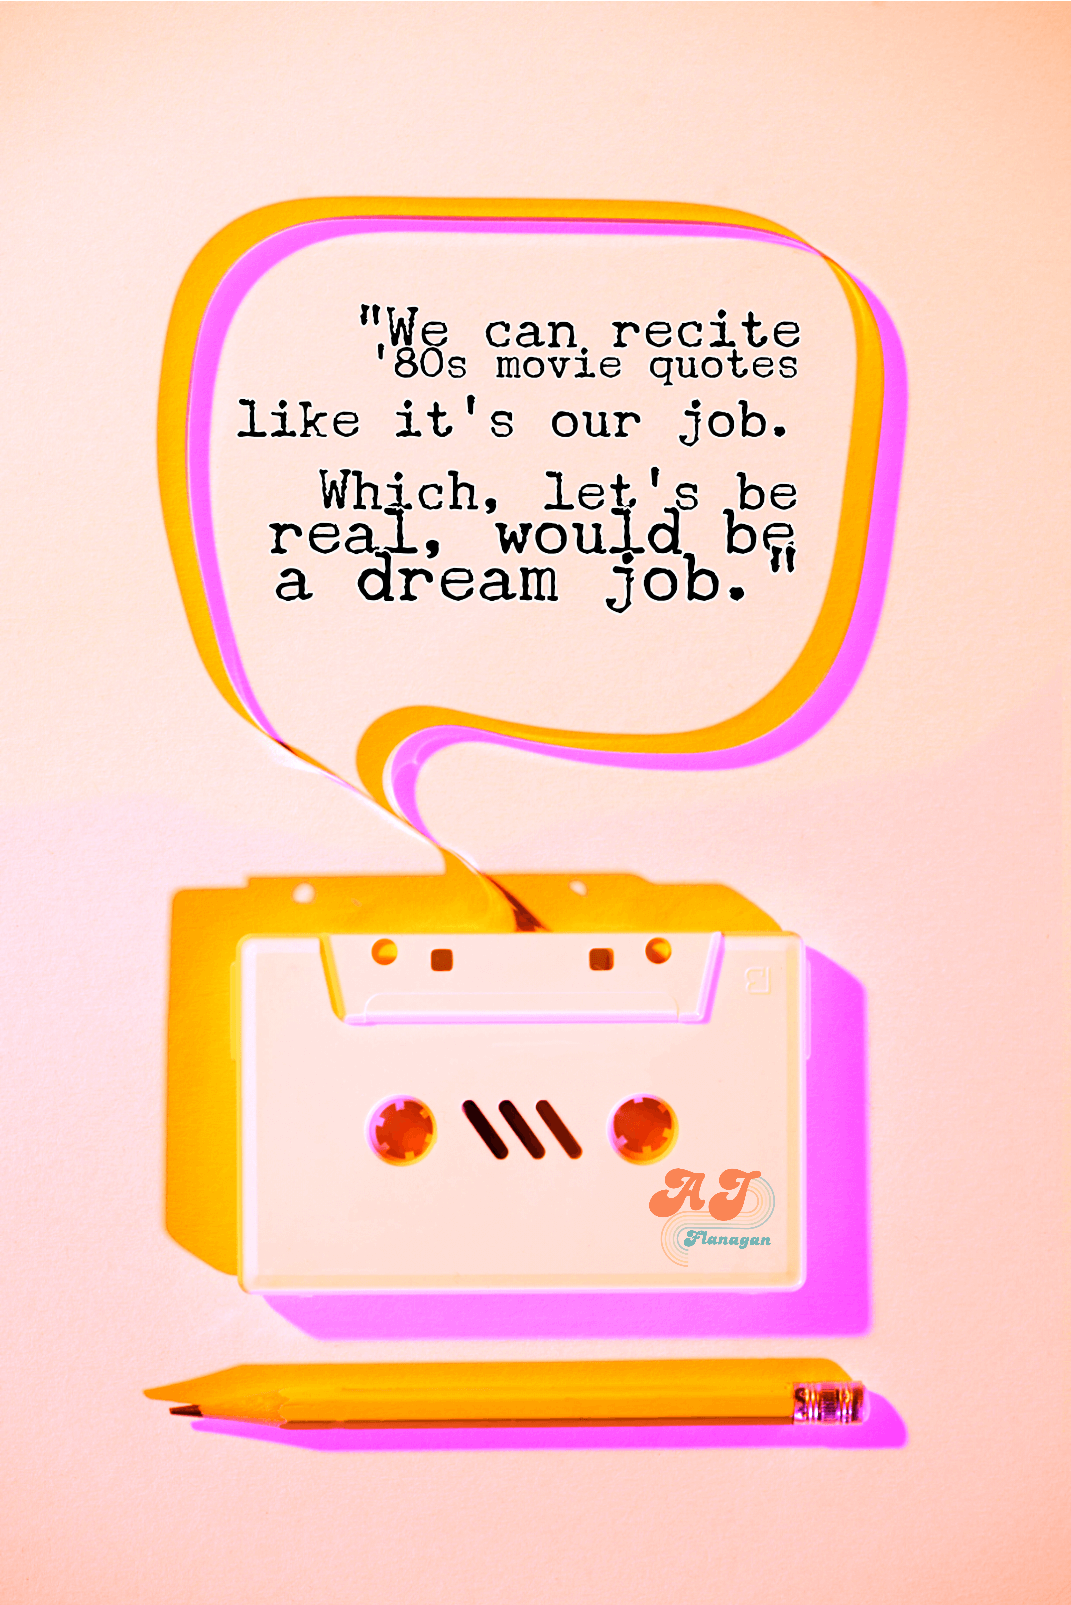 "We can recite '80s movie quotes like it's our job. Which, let's be real, would be a dream job."